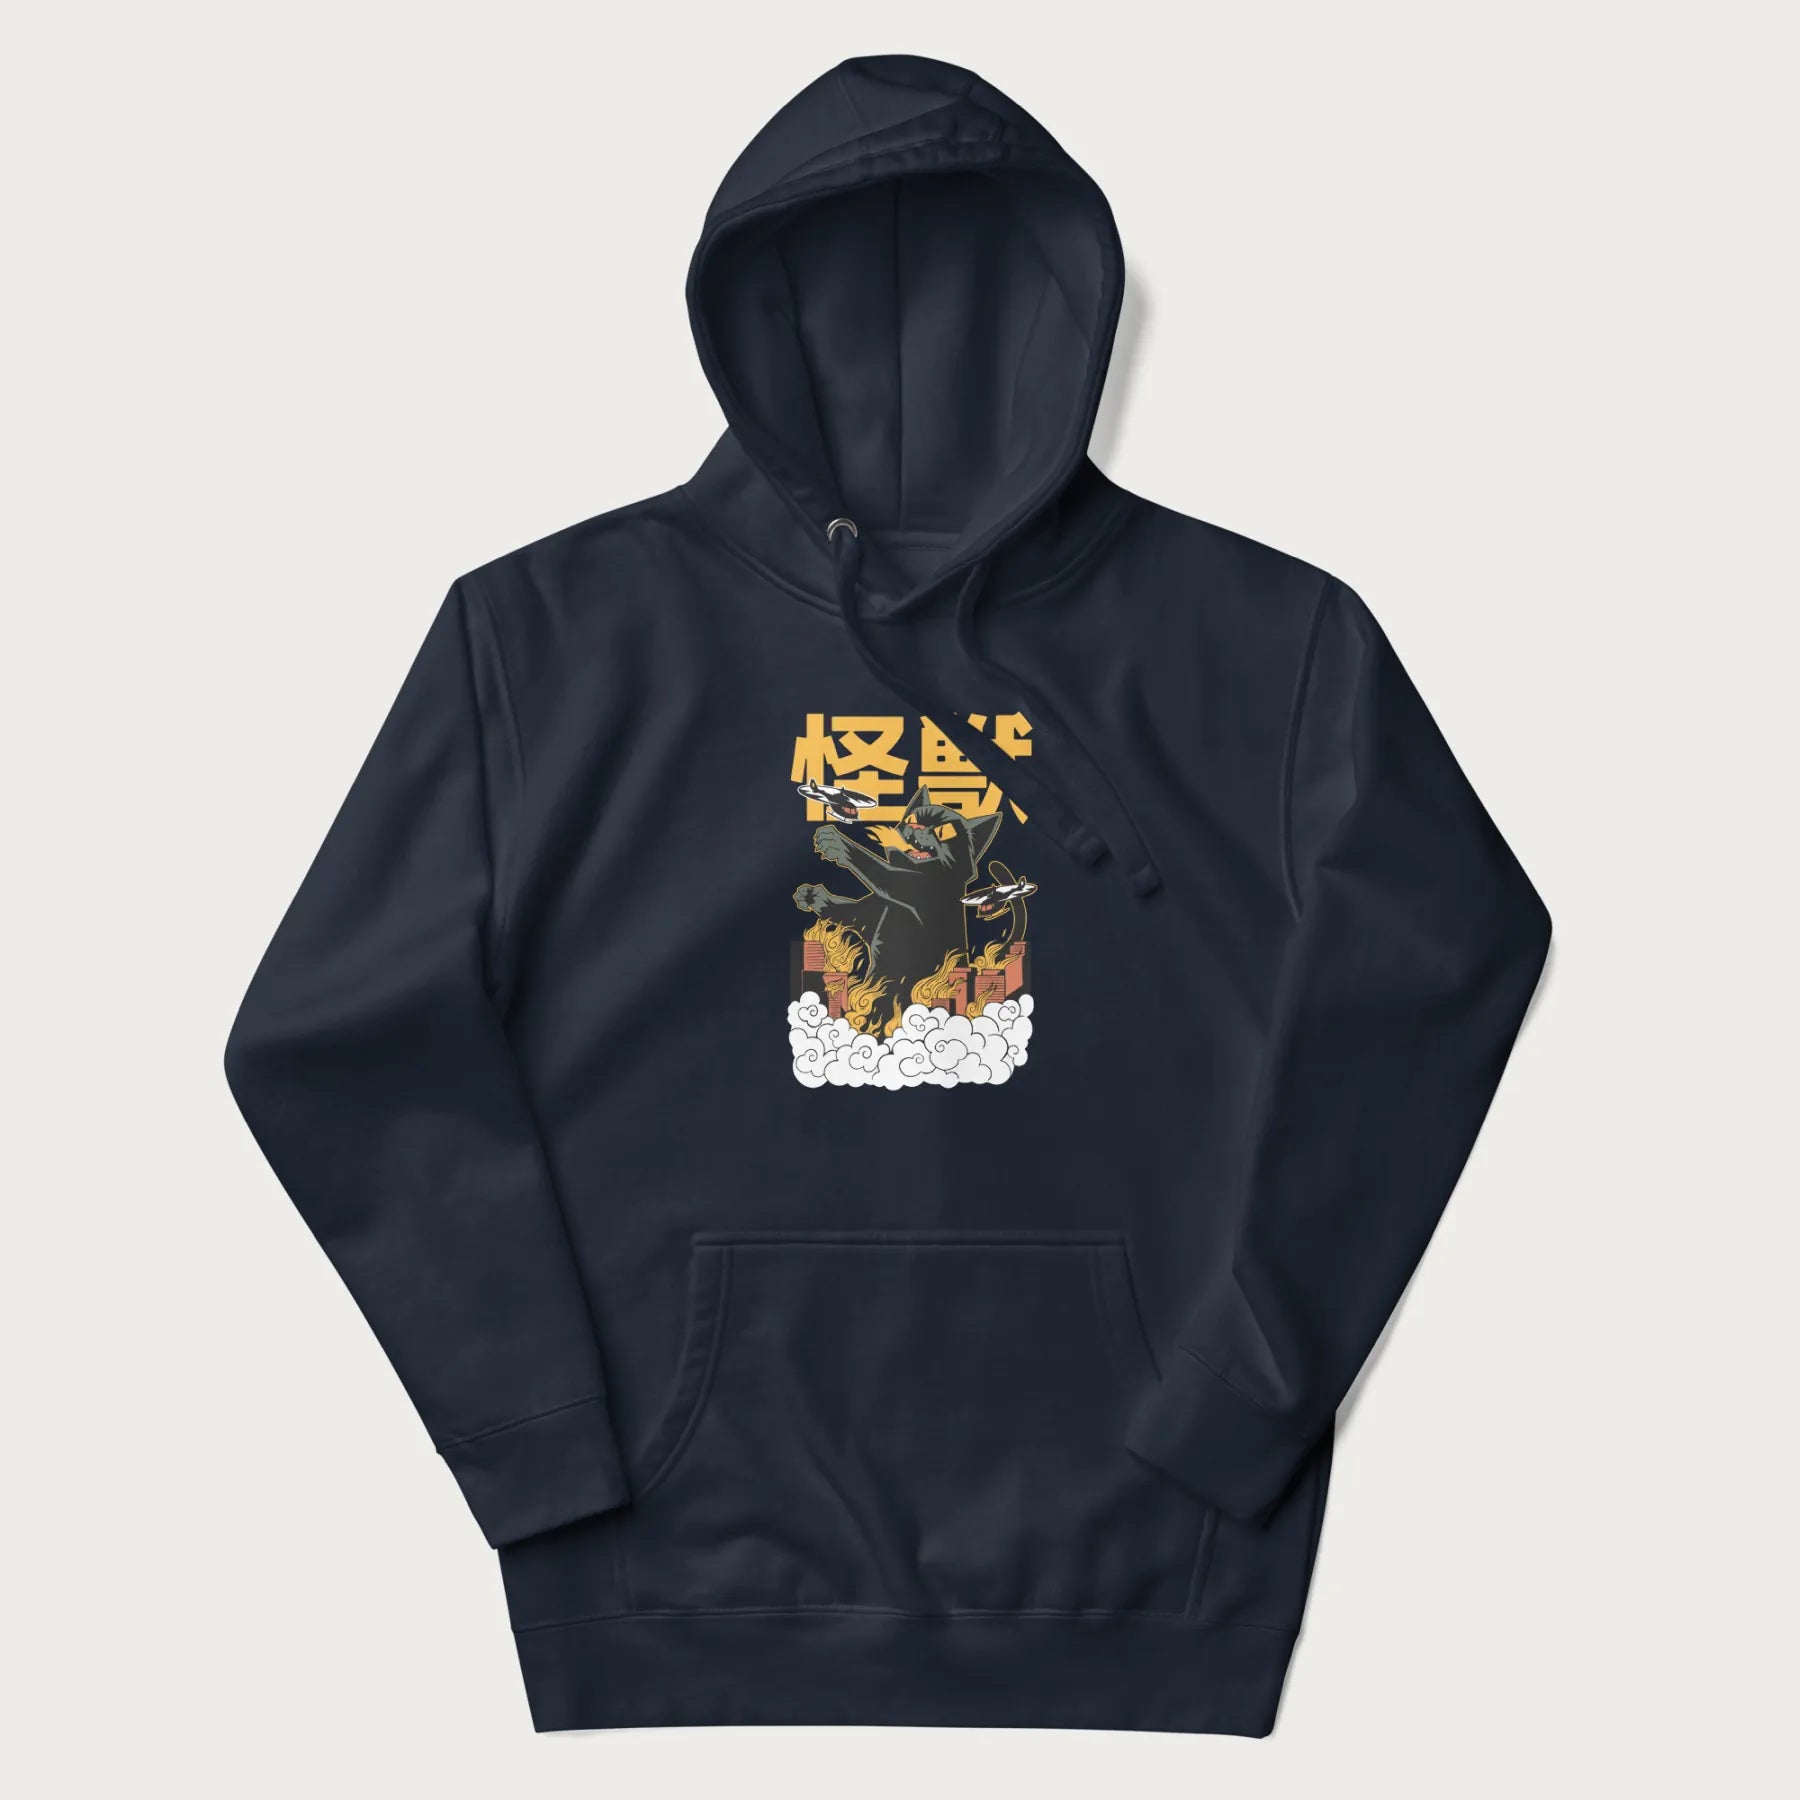 Navy blue hoodie with graphic of a 'Kaiju Cat' with helicopters and flames in a burning city.